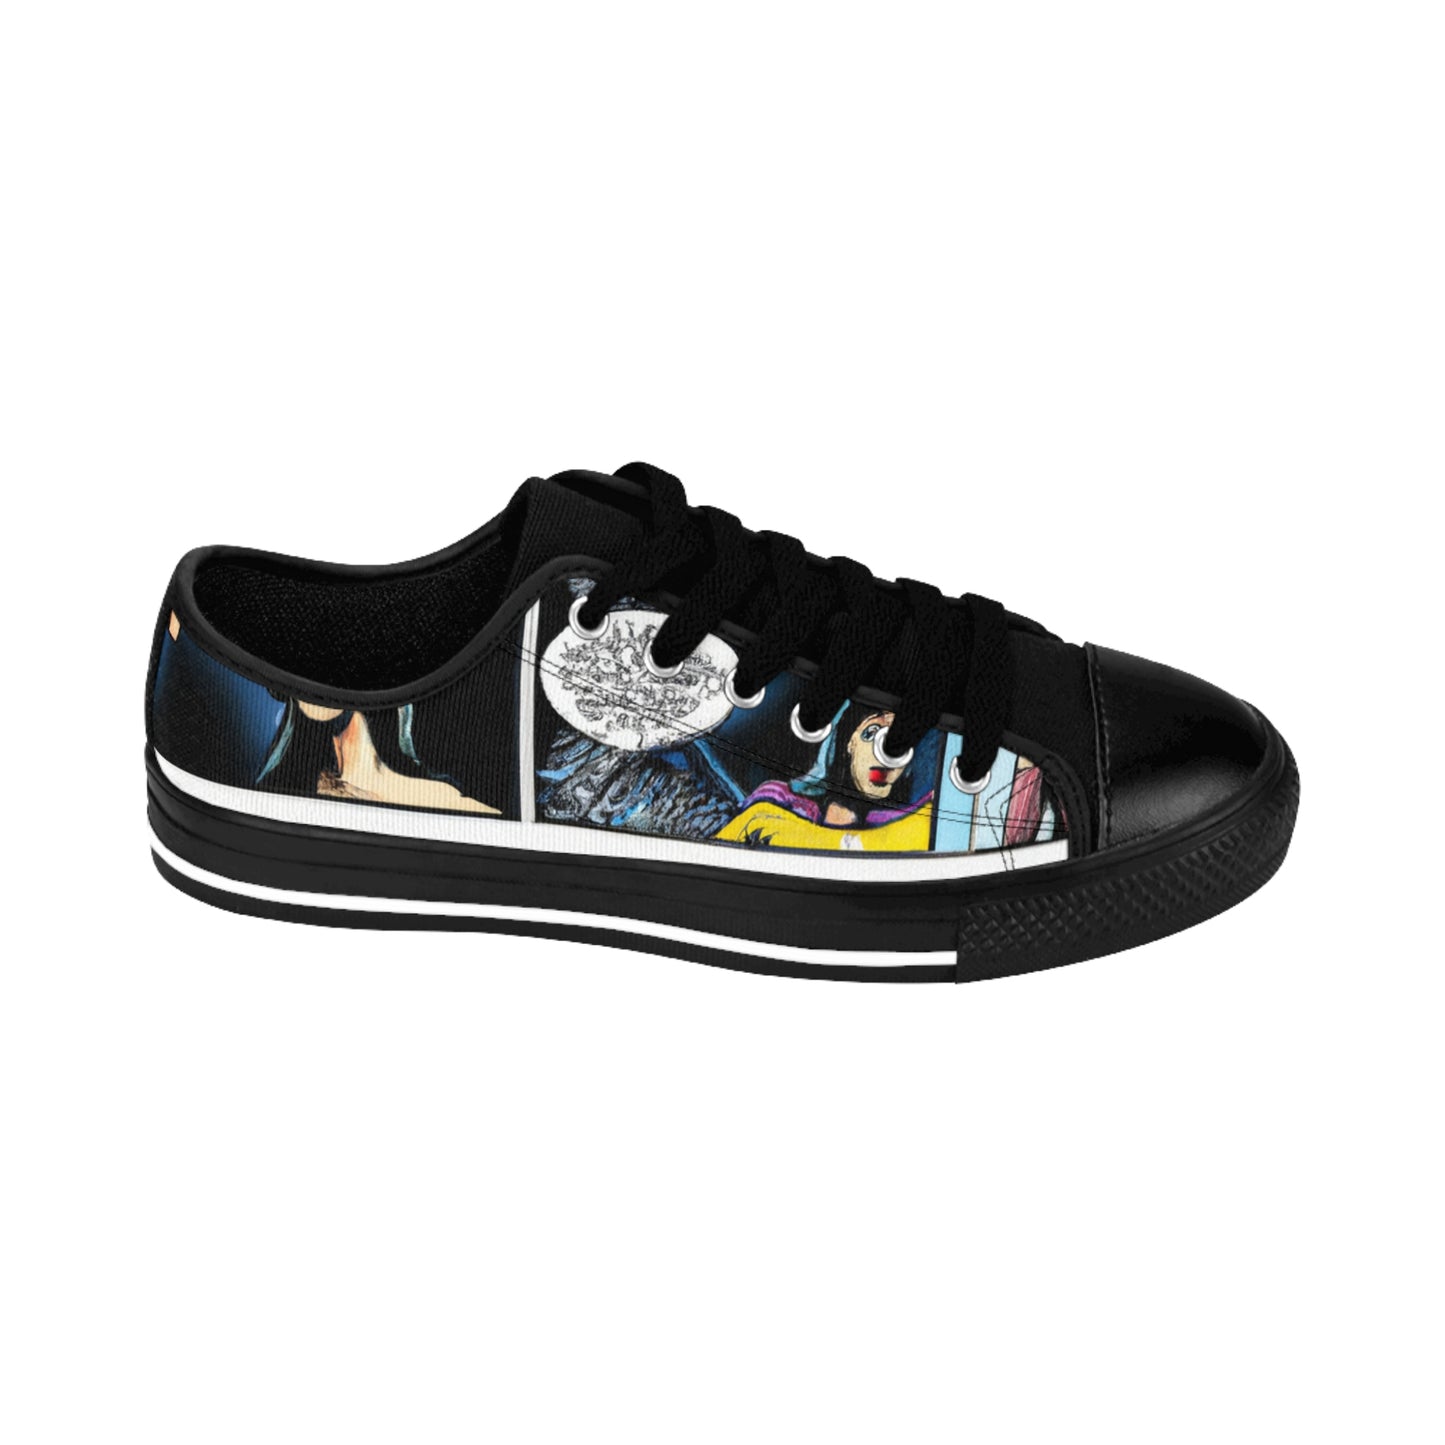 Shoeanna of Toulouse - Comic Book Low Top